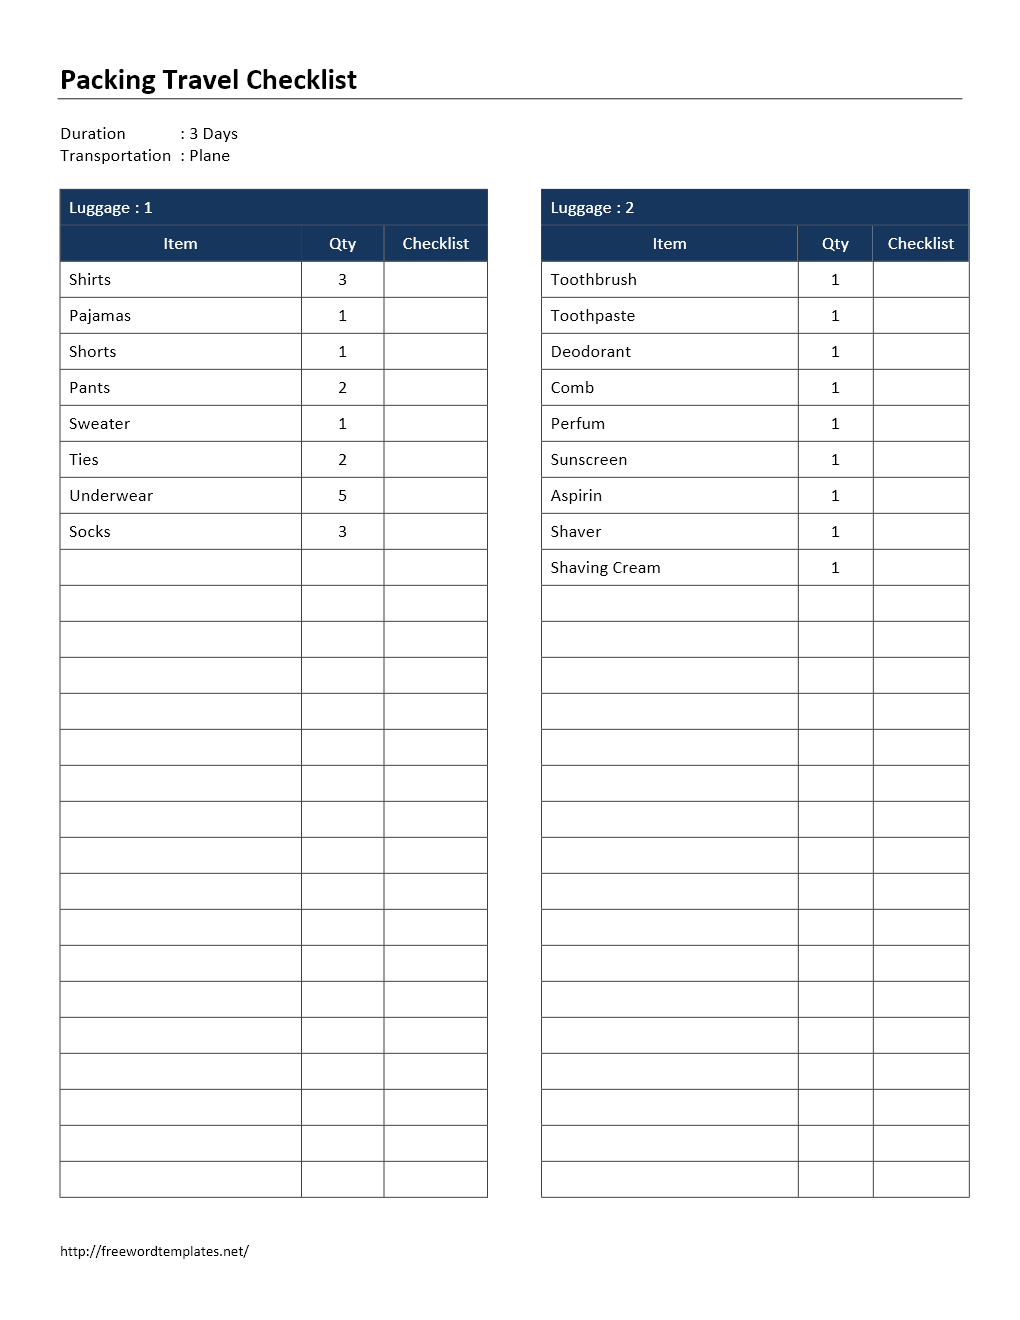 Packing Travel Checklist Template